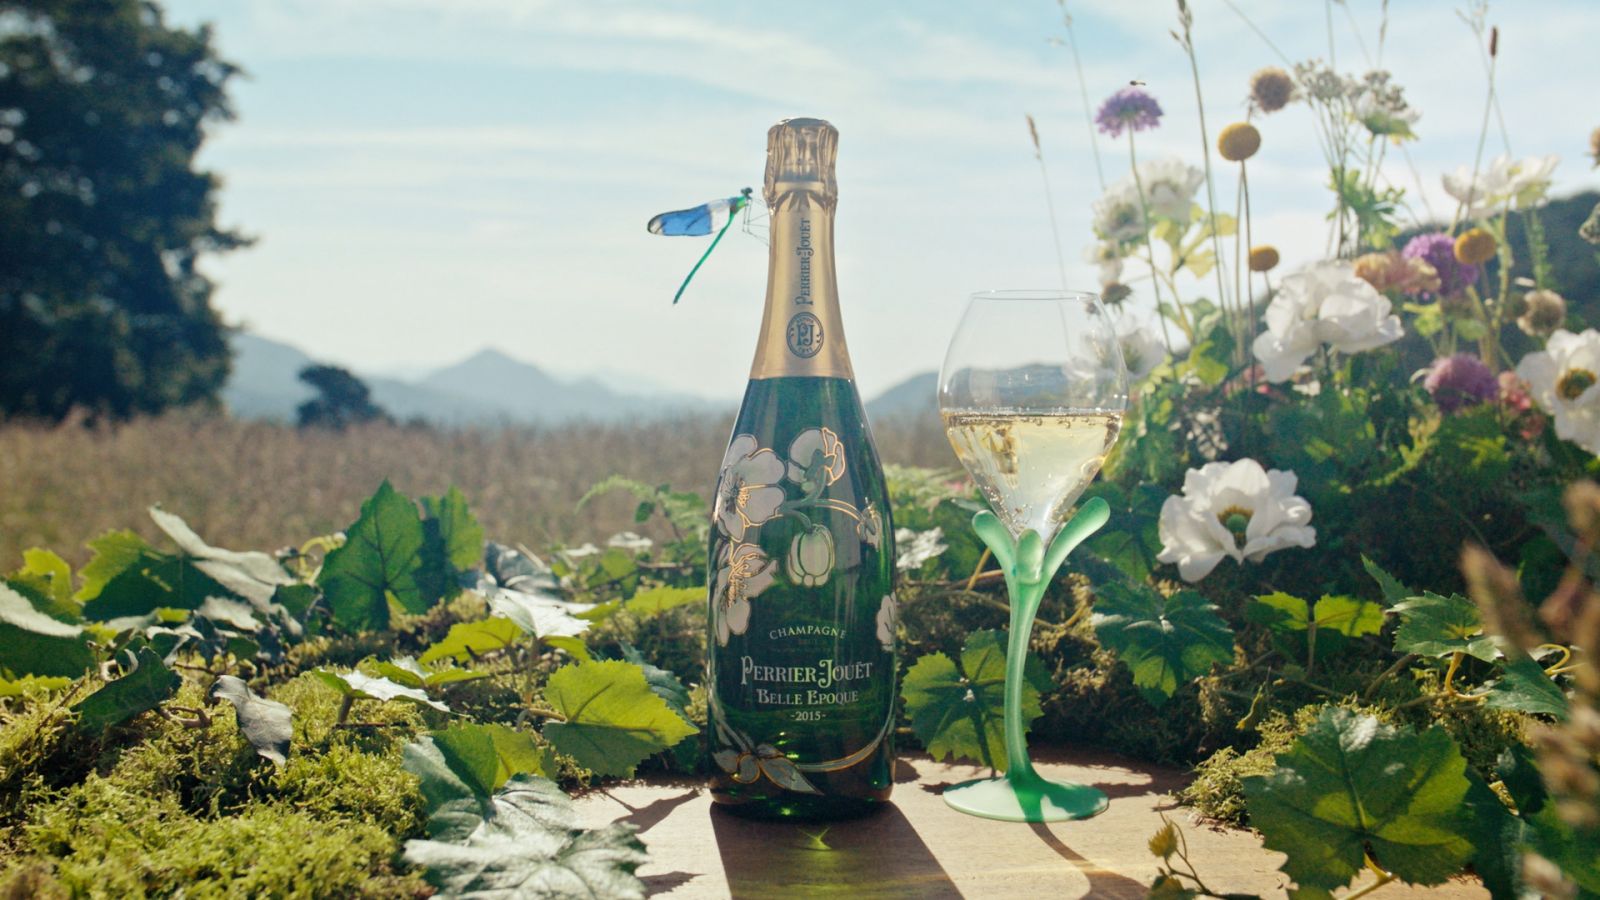 Perrier Jouet champagne